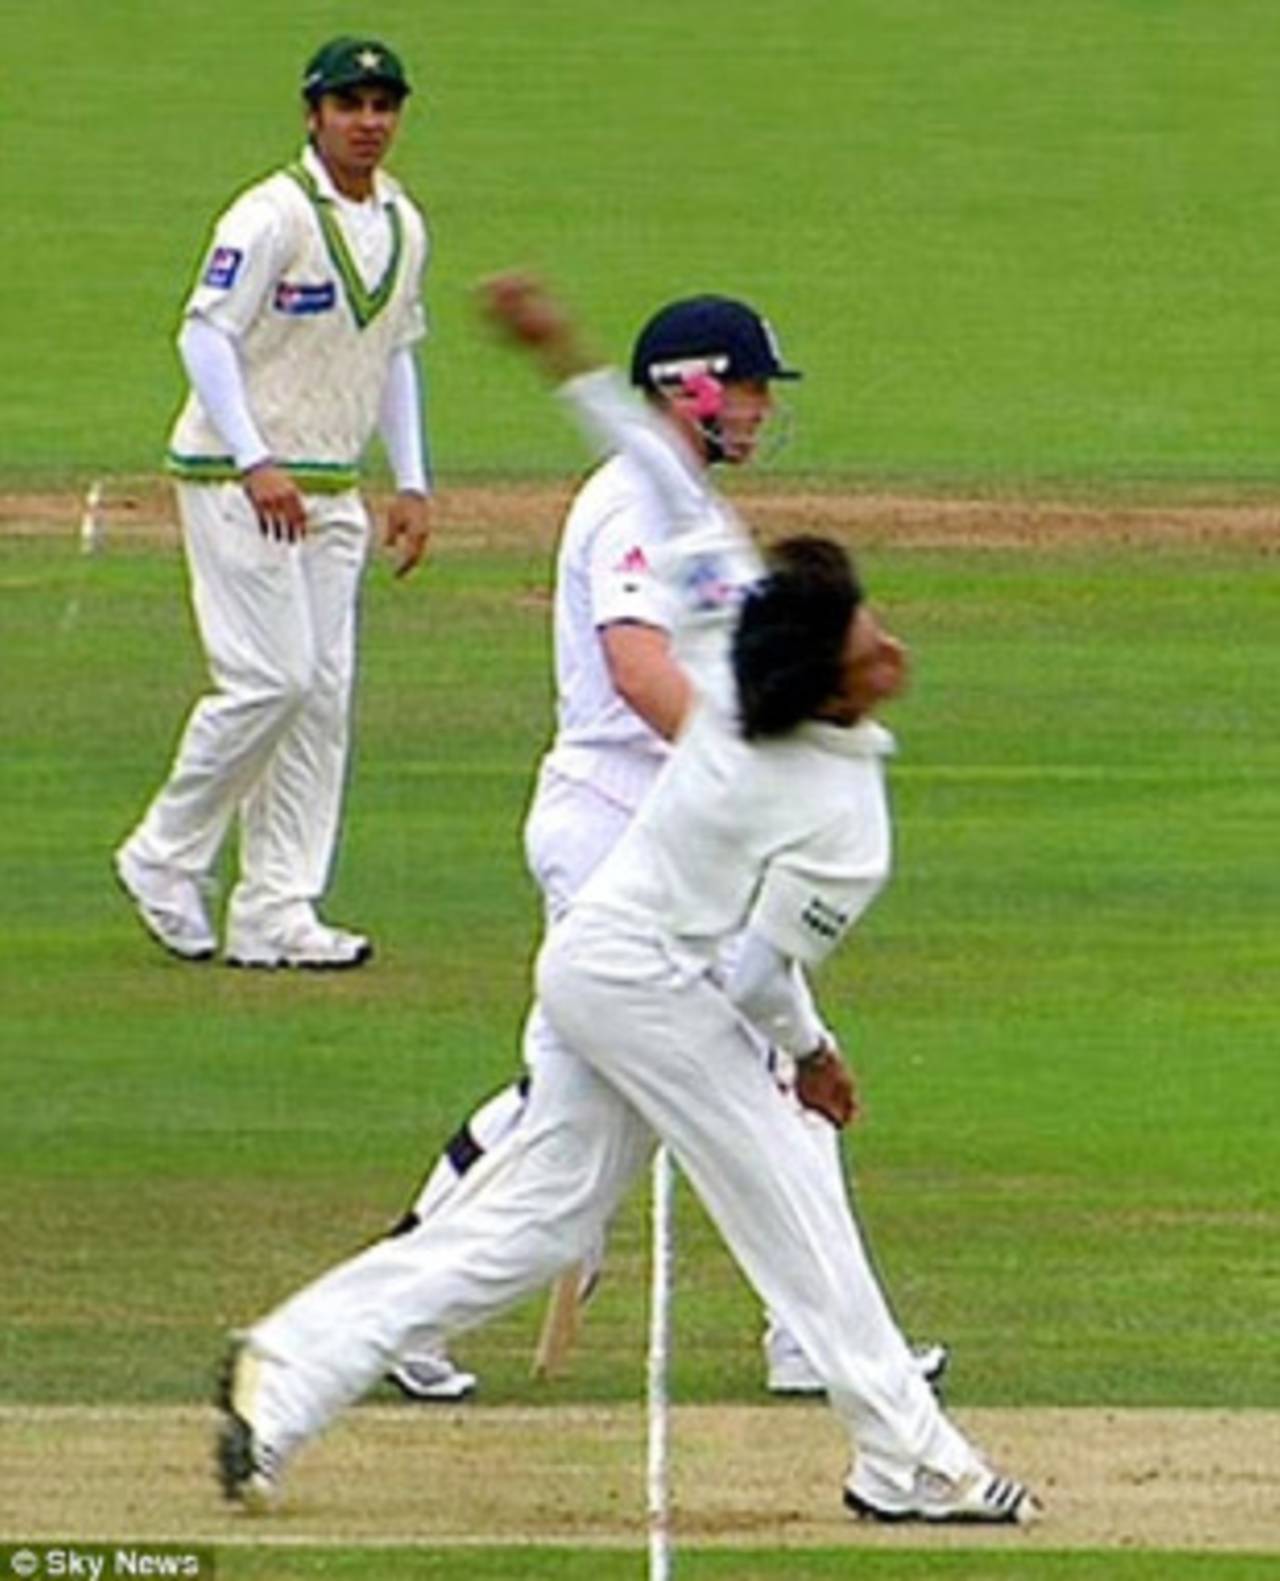 Mohammad Amir tends to bowl from well behind the front-foot line, according to Waqar Younis, except on <i>that</i> occasion at Lord's&nbsp;&nbsp;&bull;&nbsp;&nbsp;Sky Sports